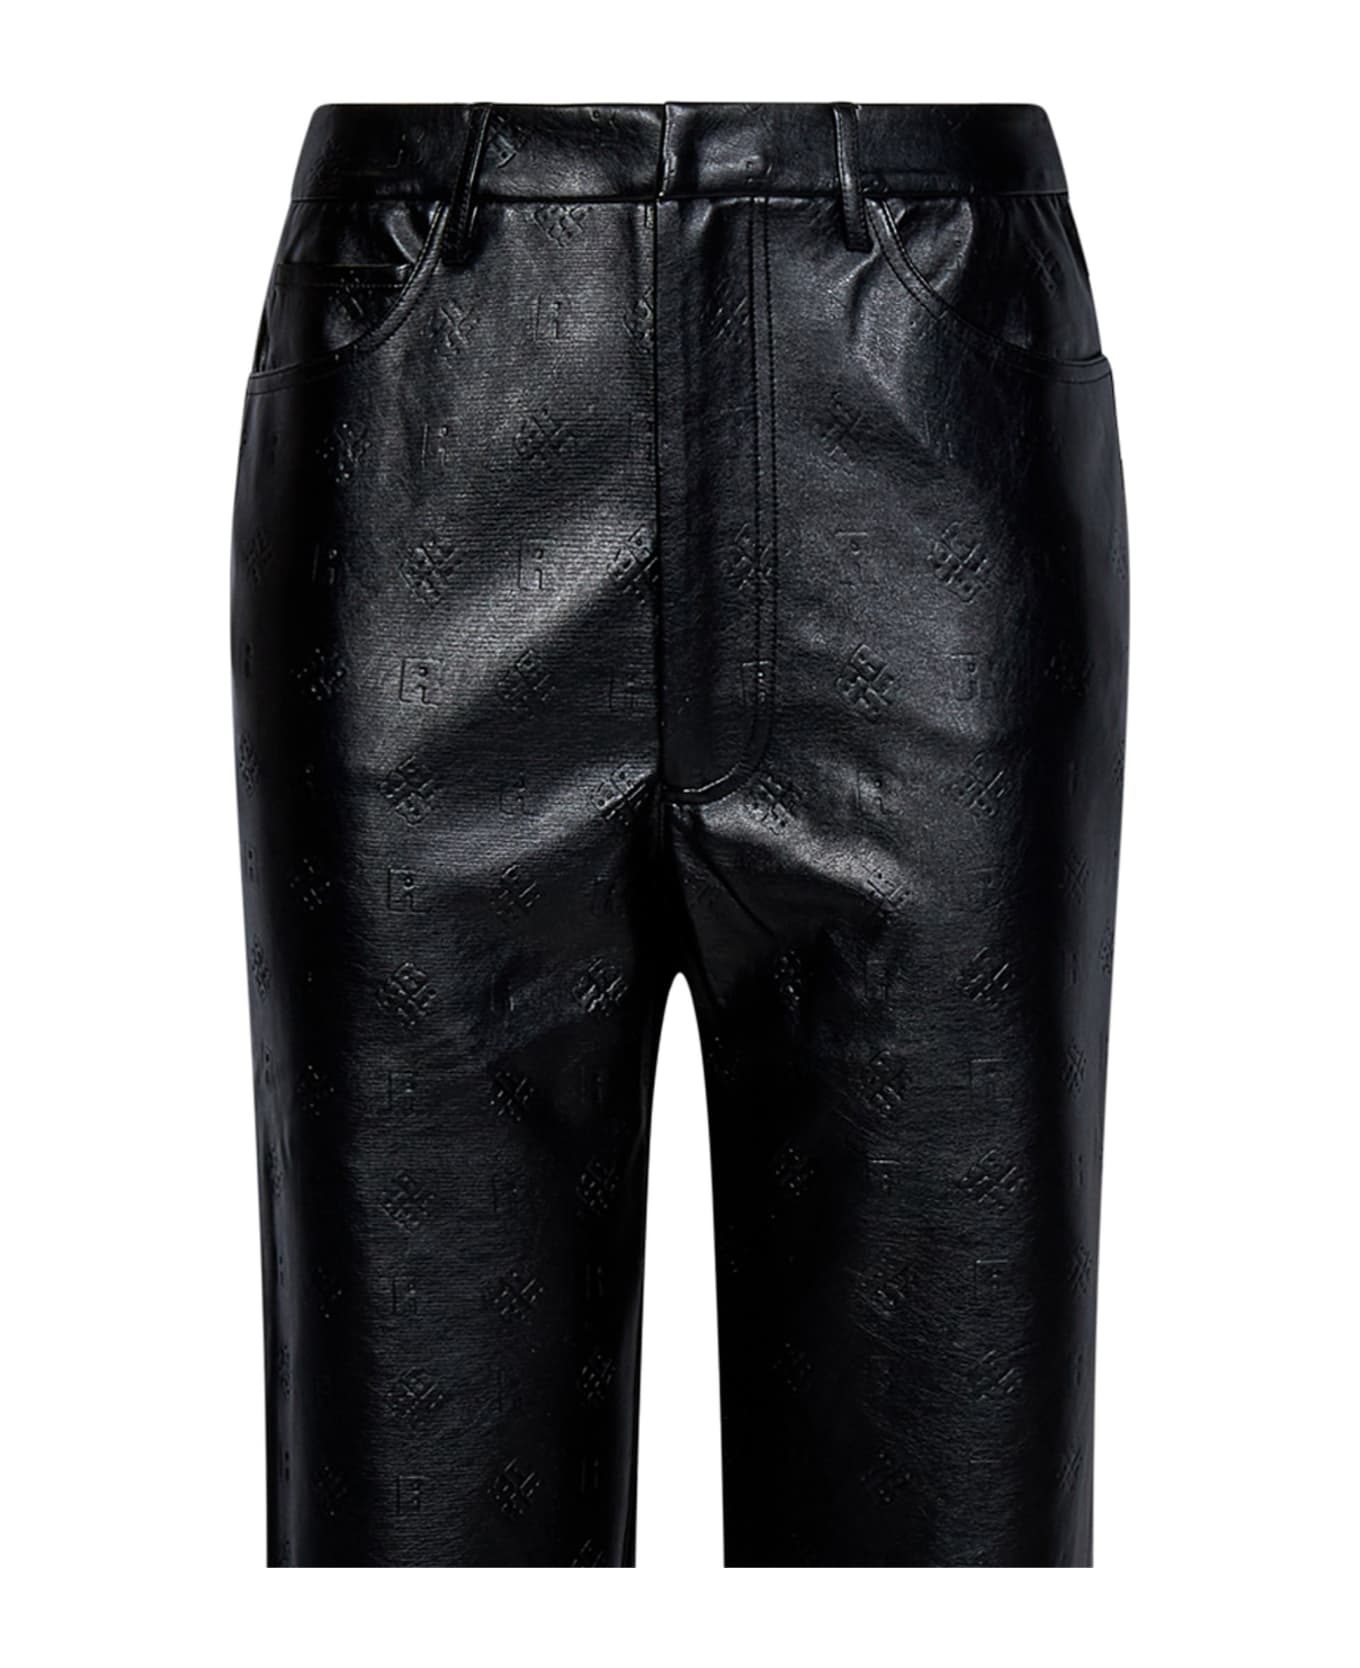 Rotate by Birger Christensen Trousers - Black